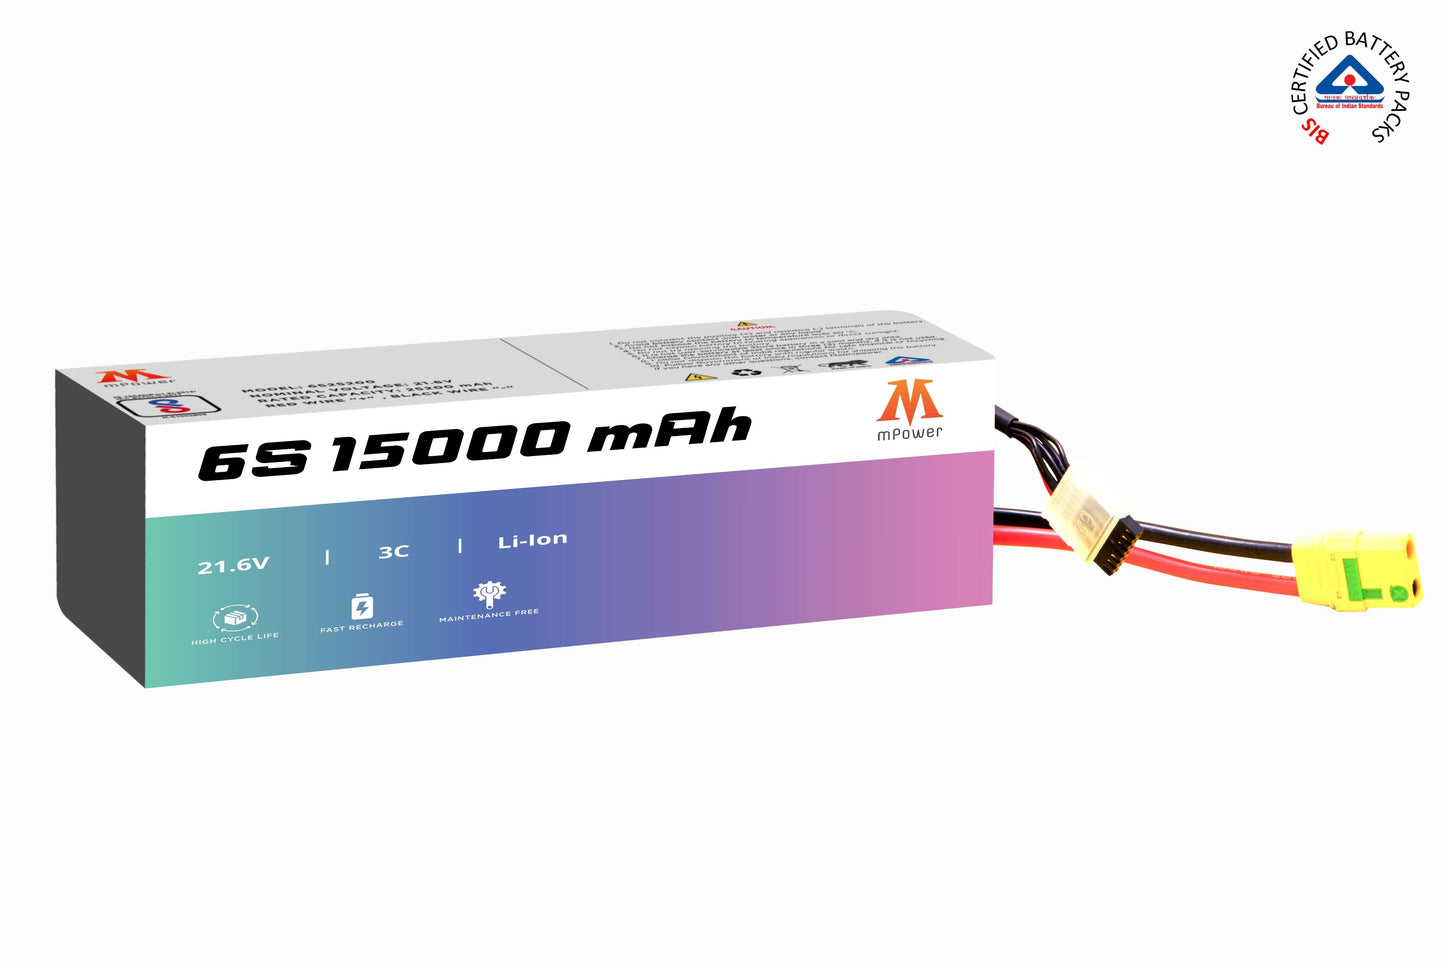 mPower 6S 15000mAh Lithium-Ion Battery for Surveillance Drones